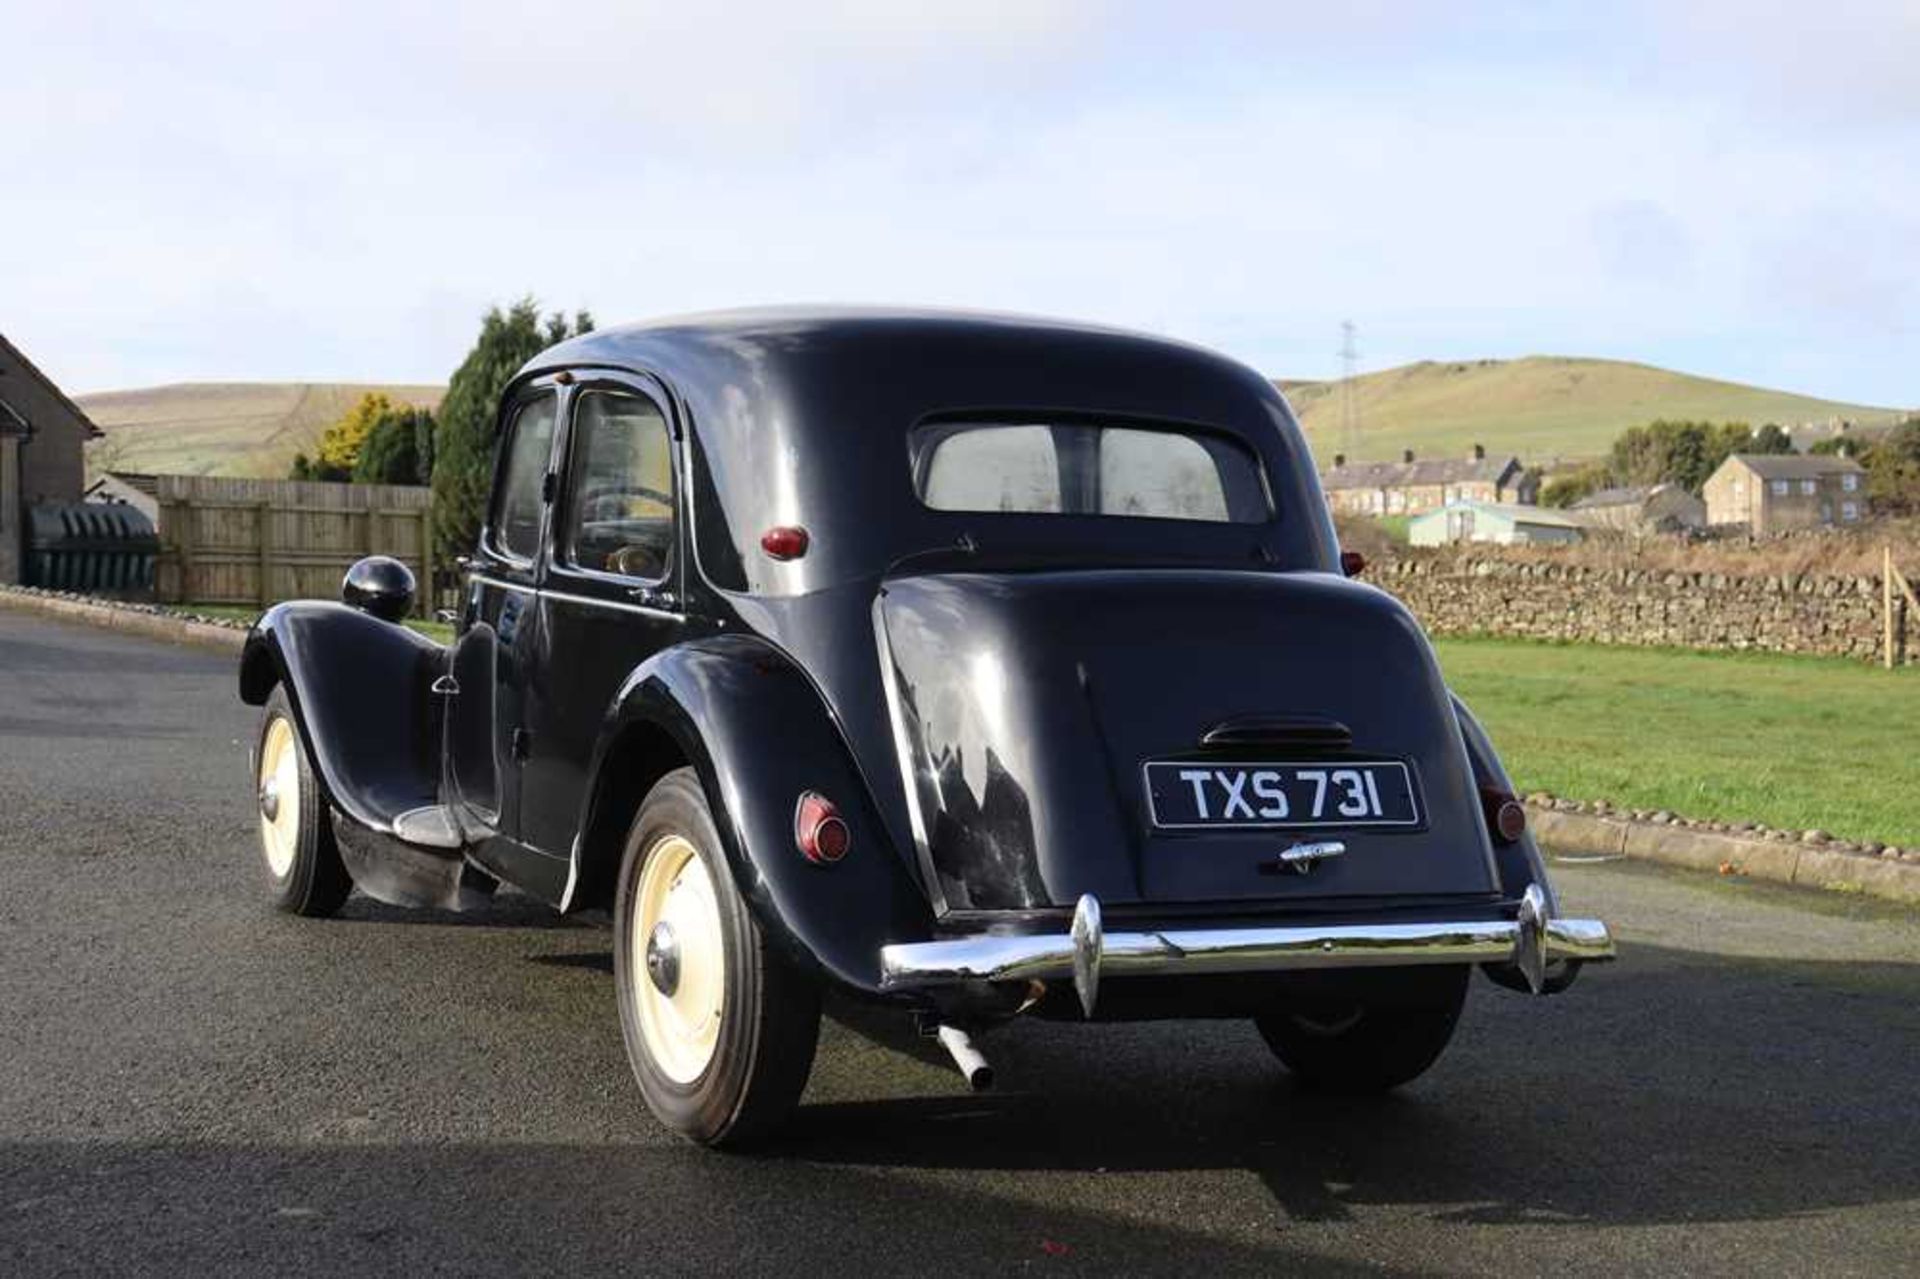 1952 Citroën 11BL Traction Avant In current ownership for over 40 years - Image 13 of 60